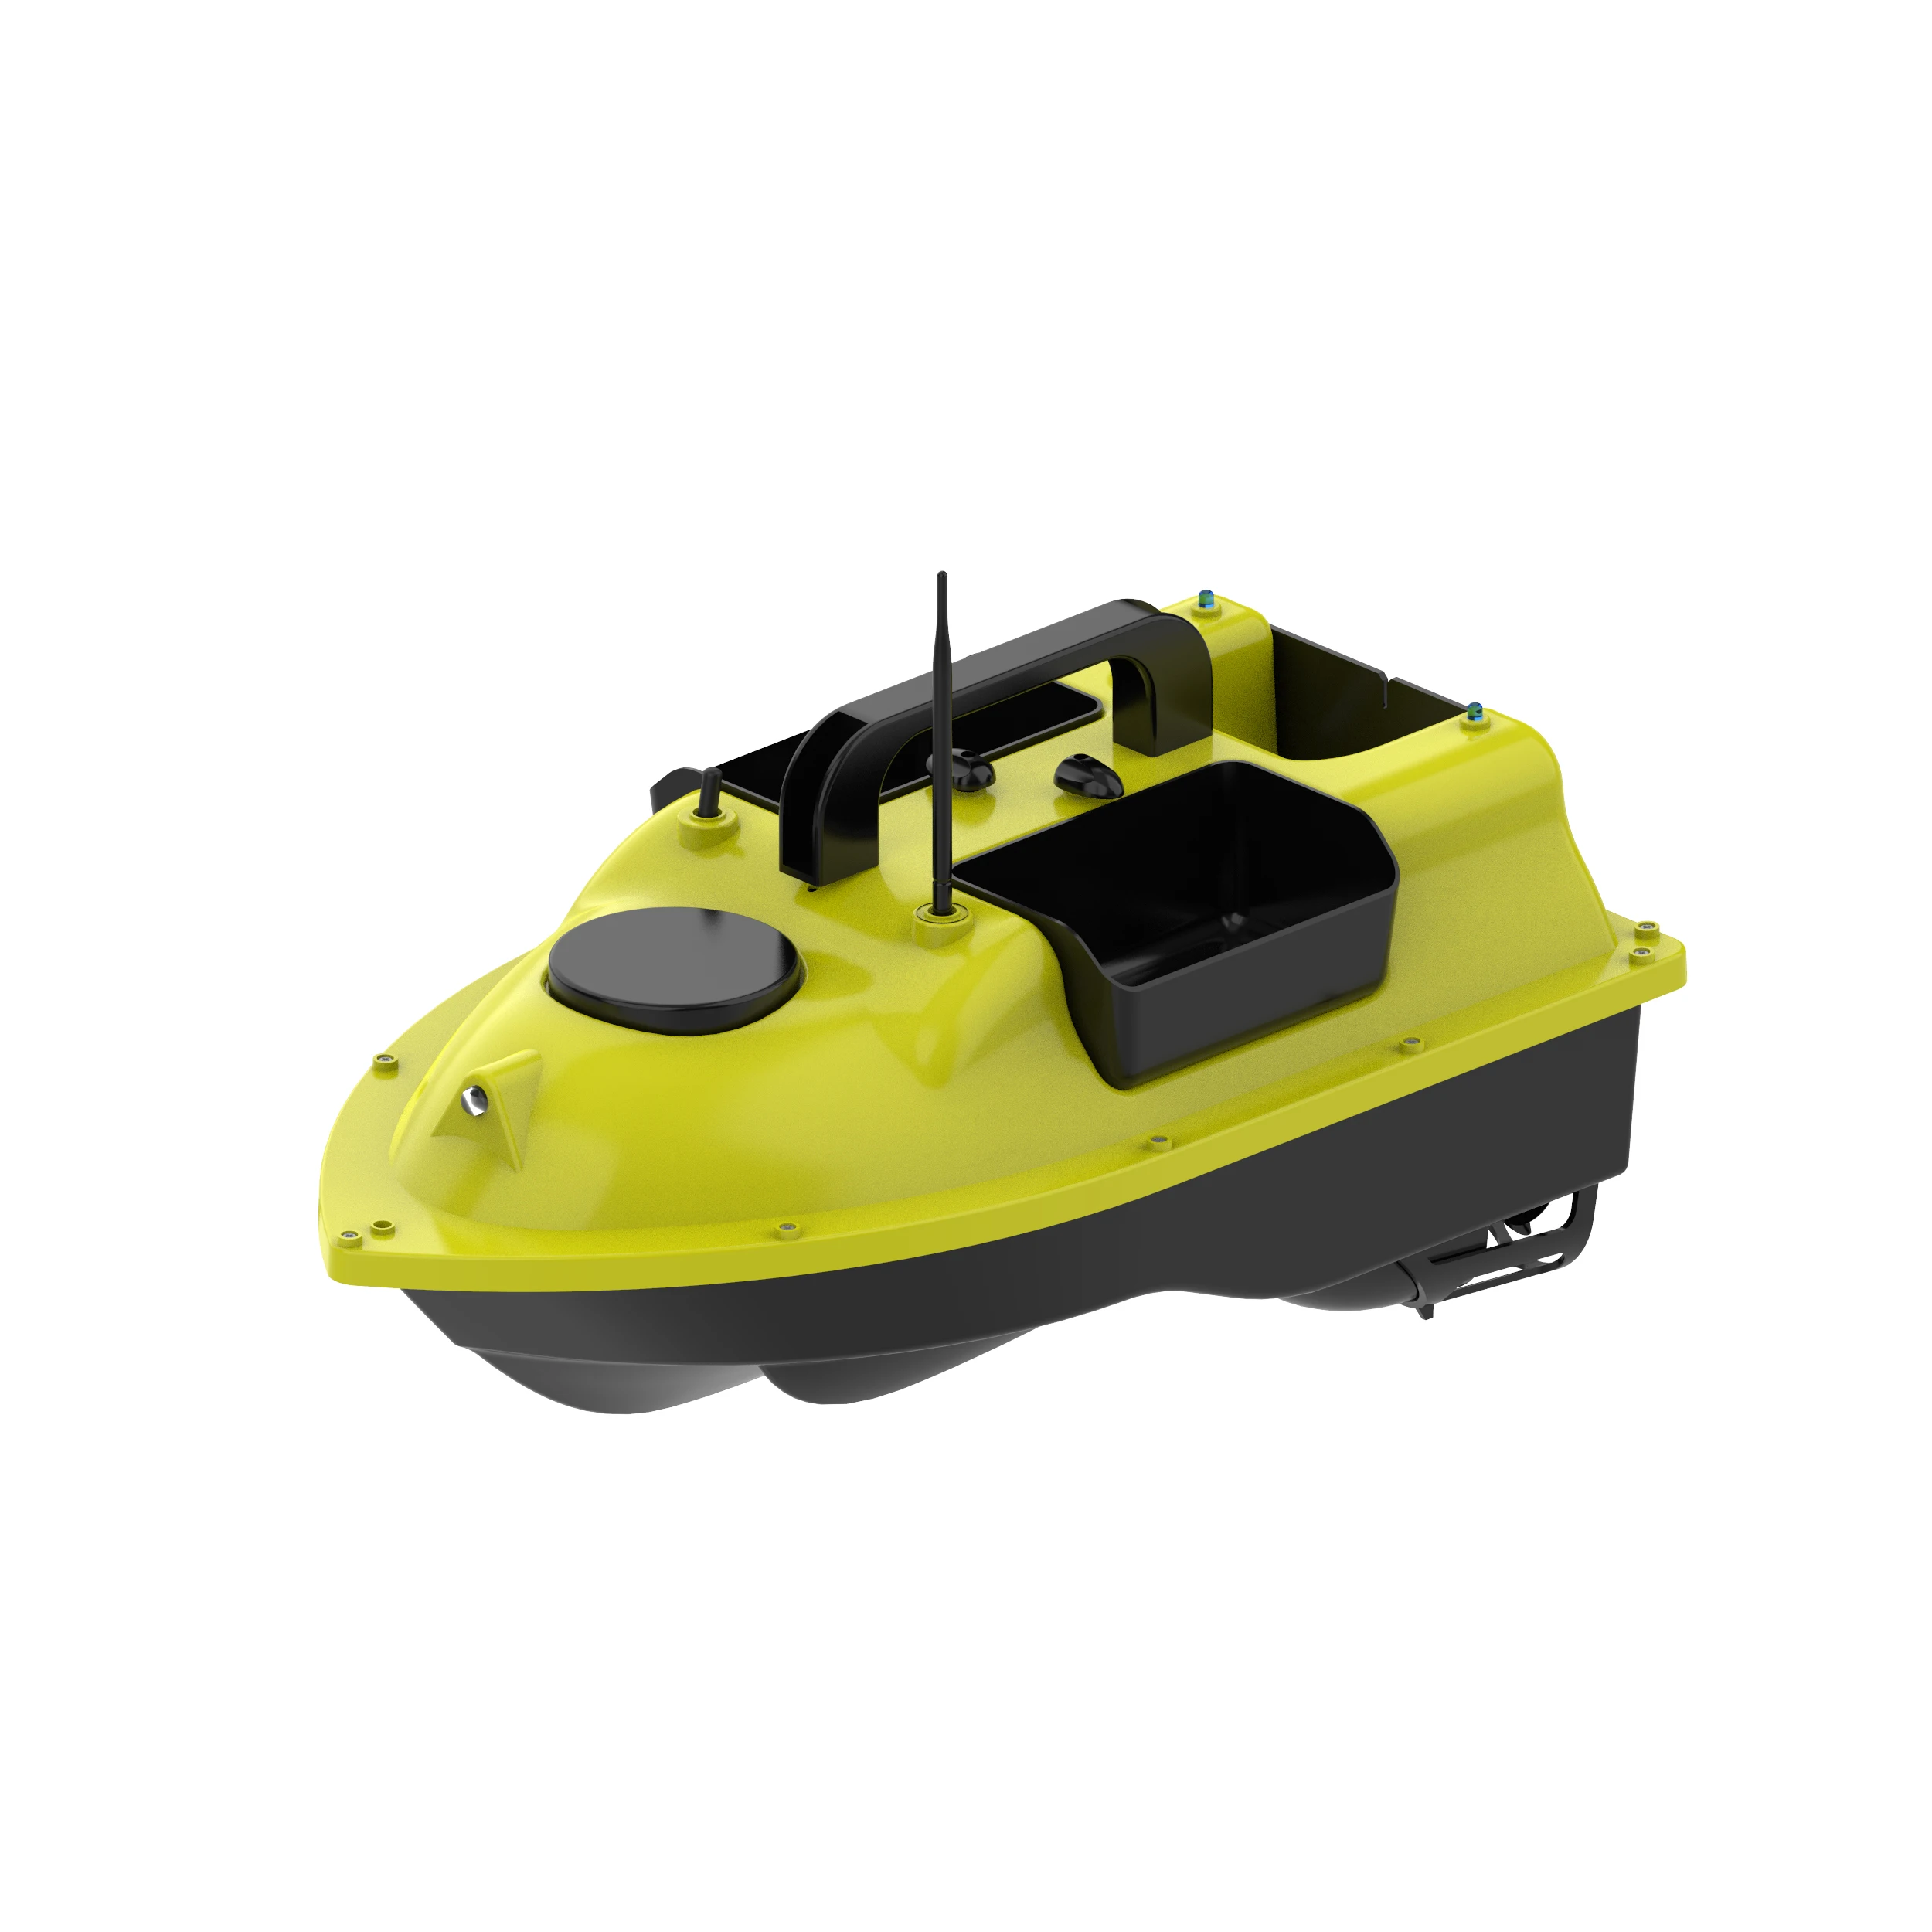 

New 500M High Speed 2KG Weight Three Hoppers Samrt Actor Fishing Bait Boats GPS Remote Control Boat RC Bait Hoat For Fishing